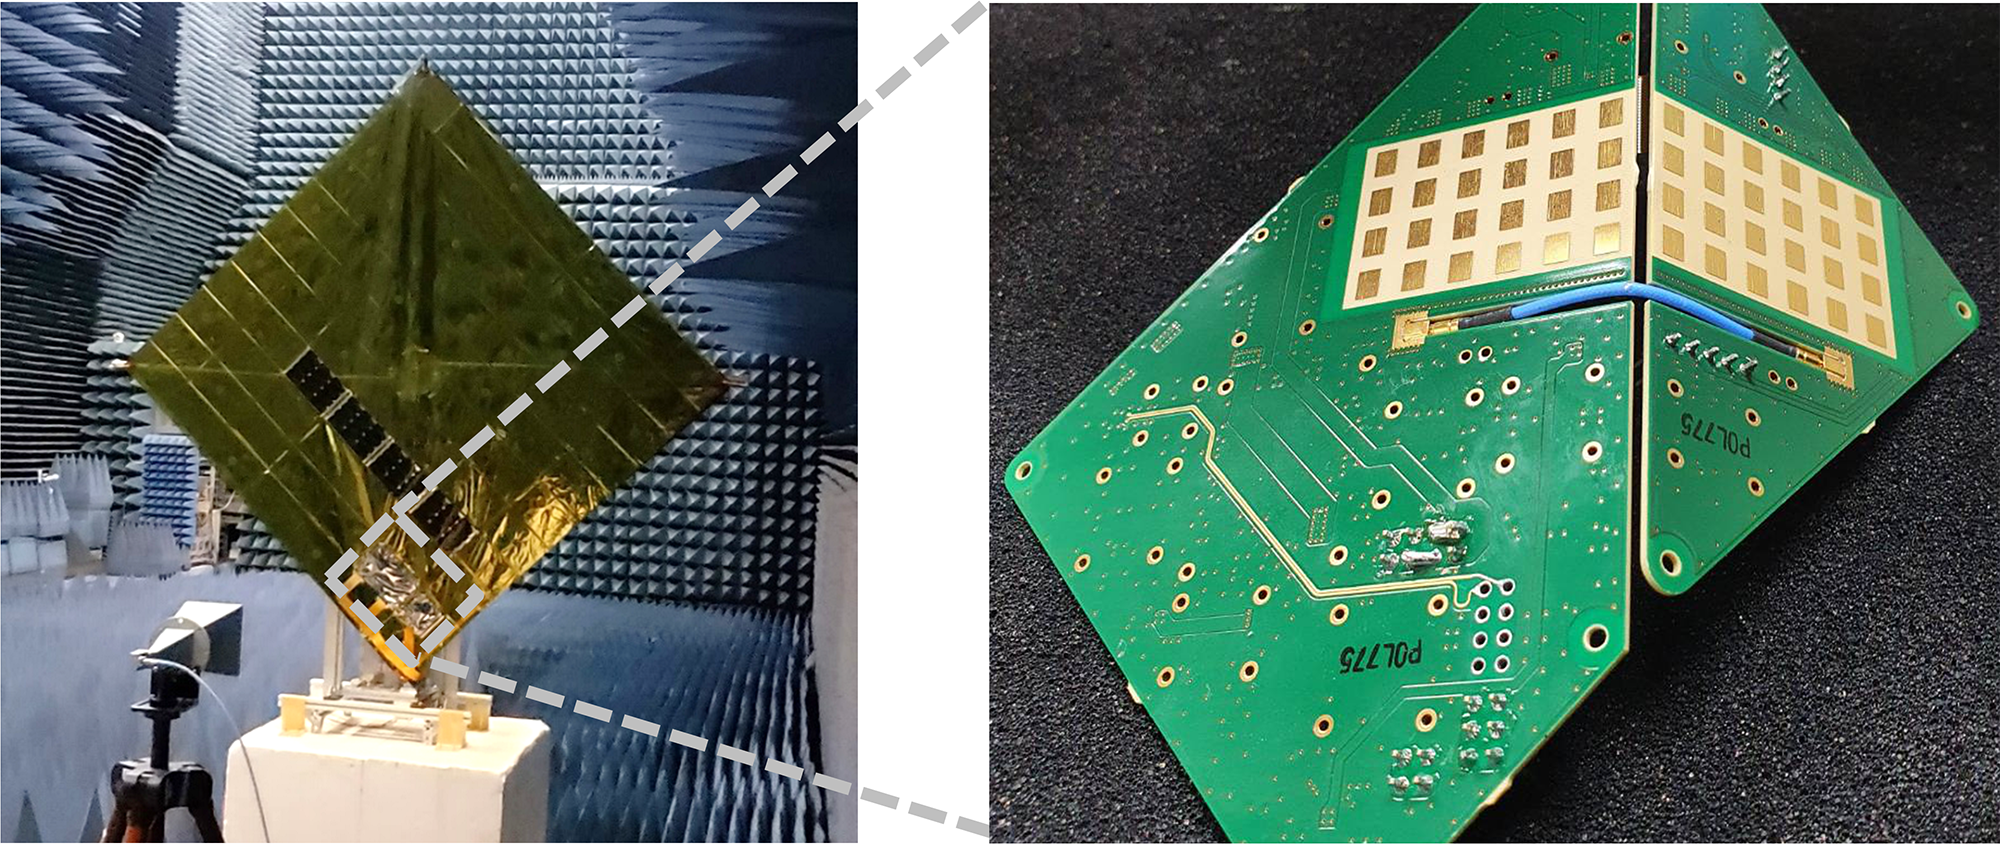 Left figure: space deployable non-planar phased-array transceiver. Right figure: non-planar phased-array transceiver board (plan to launch in 2022)